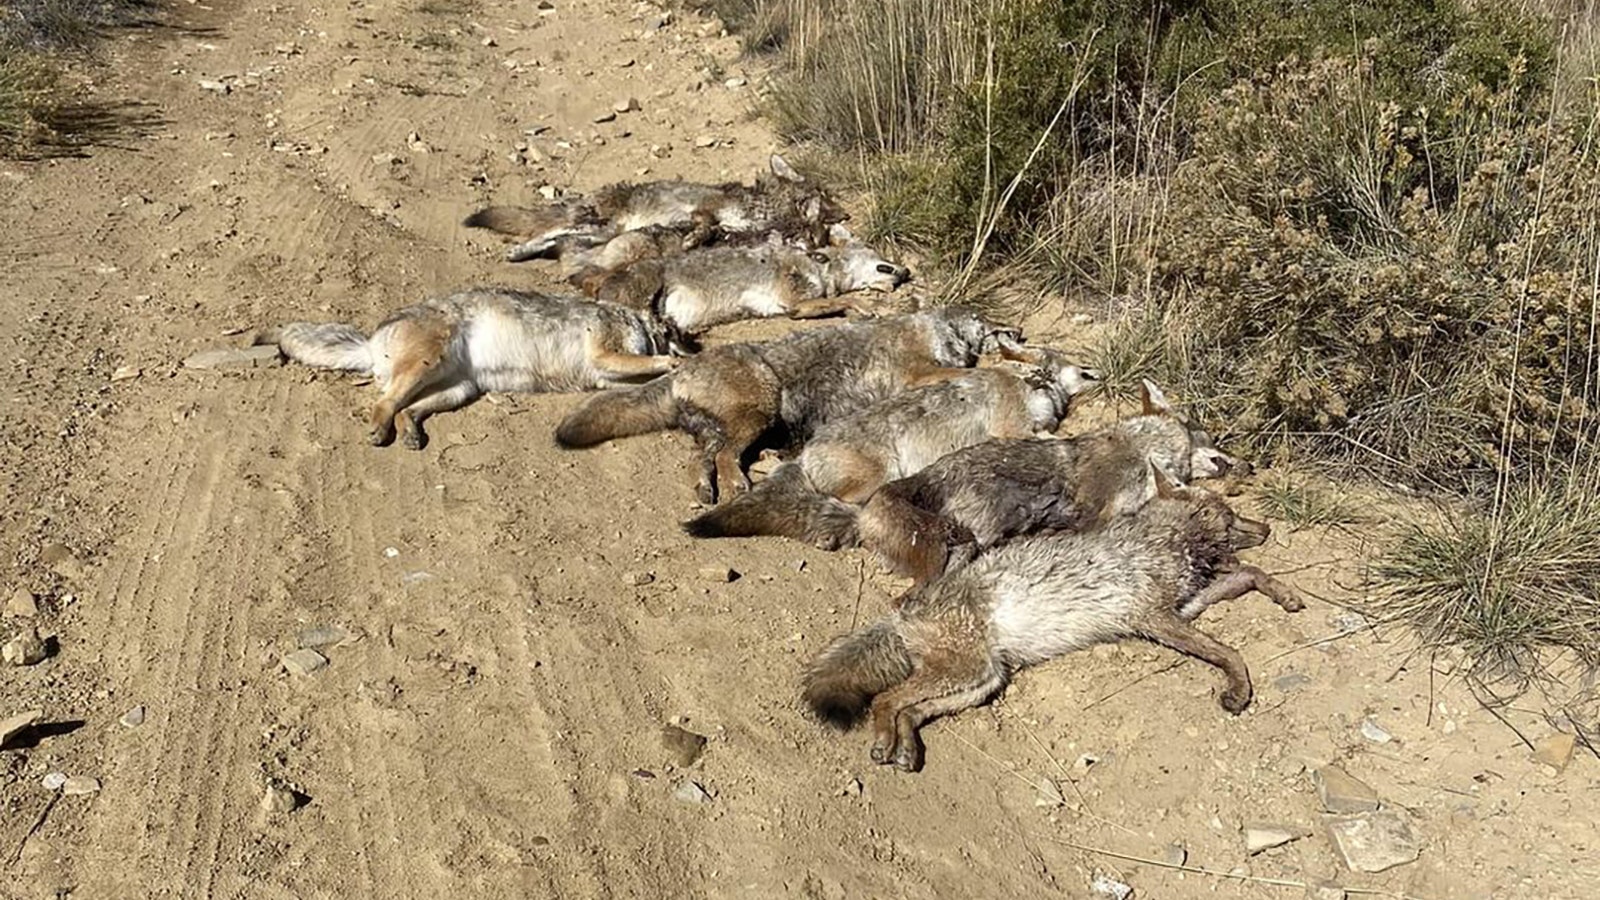 Jo Lynn Emerson of Rock Springs said she found four dead coyotes piled near a popular recreation area on Oct. 9, and three more added to the pile on Sunday.